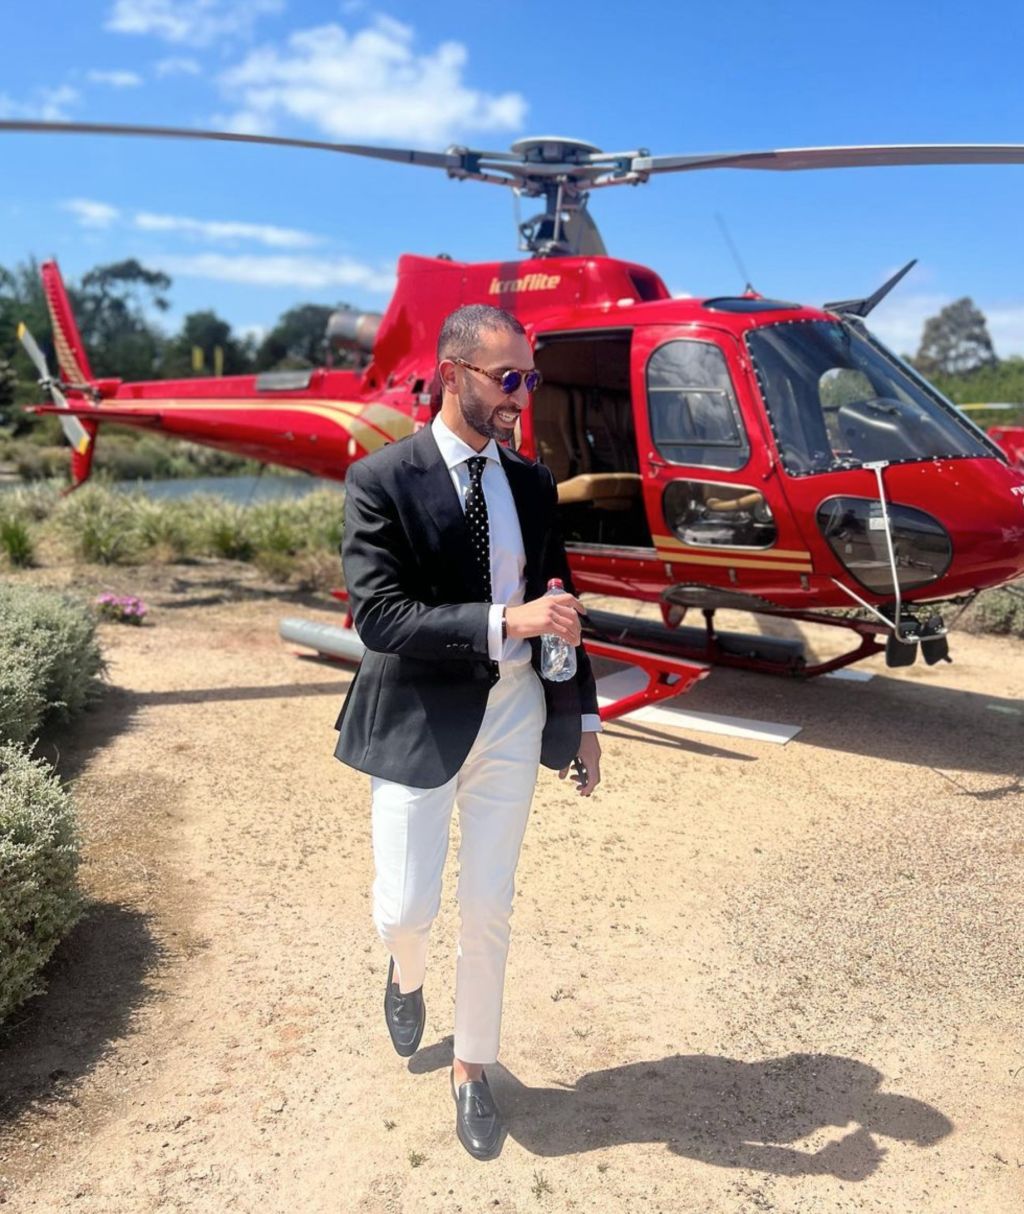 Fady Tossoun, husband of House 3 buyer Amy Tossoun, travelled to and from the auction via a helicopter. Photo: @amy.tossoun / Instagram